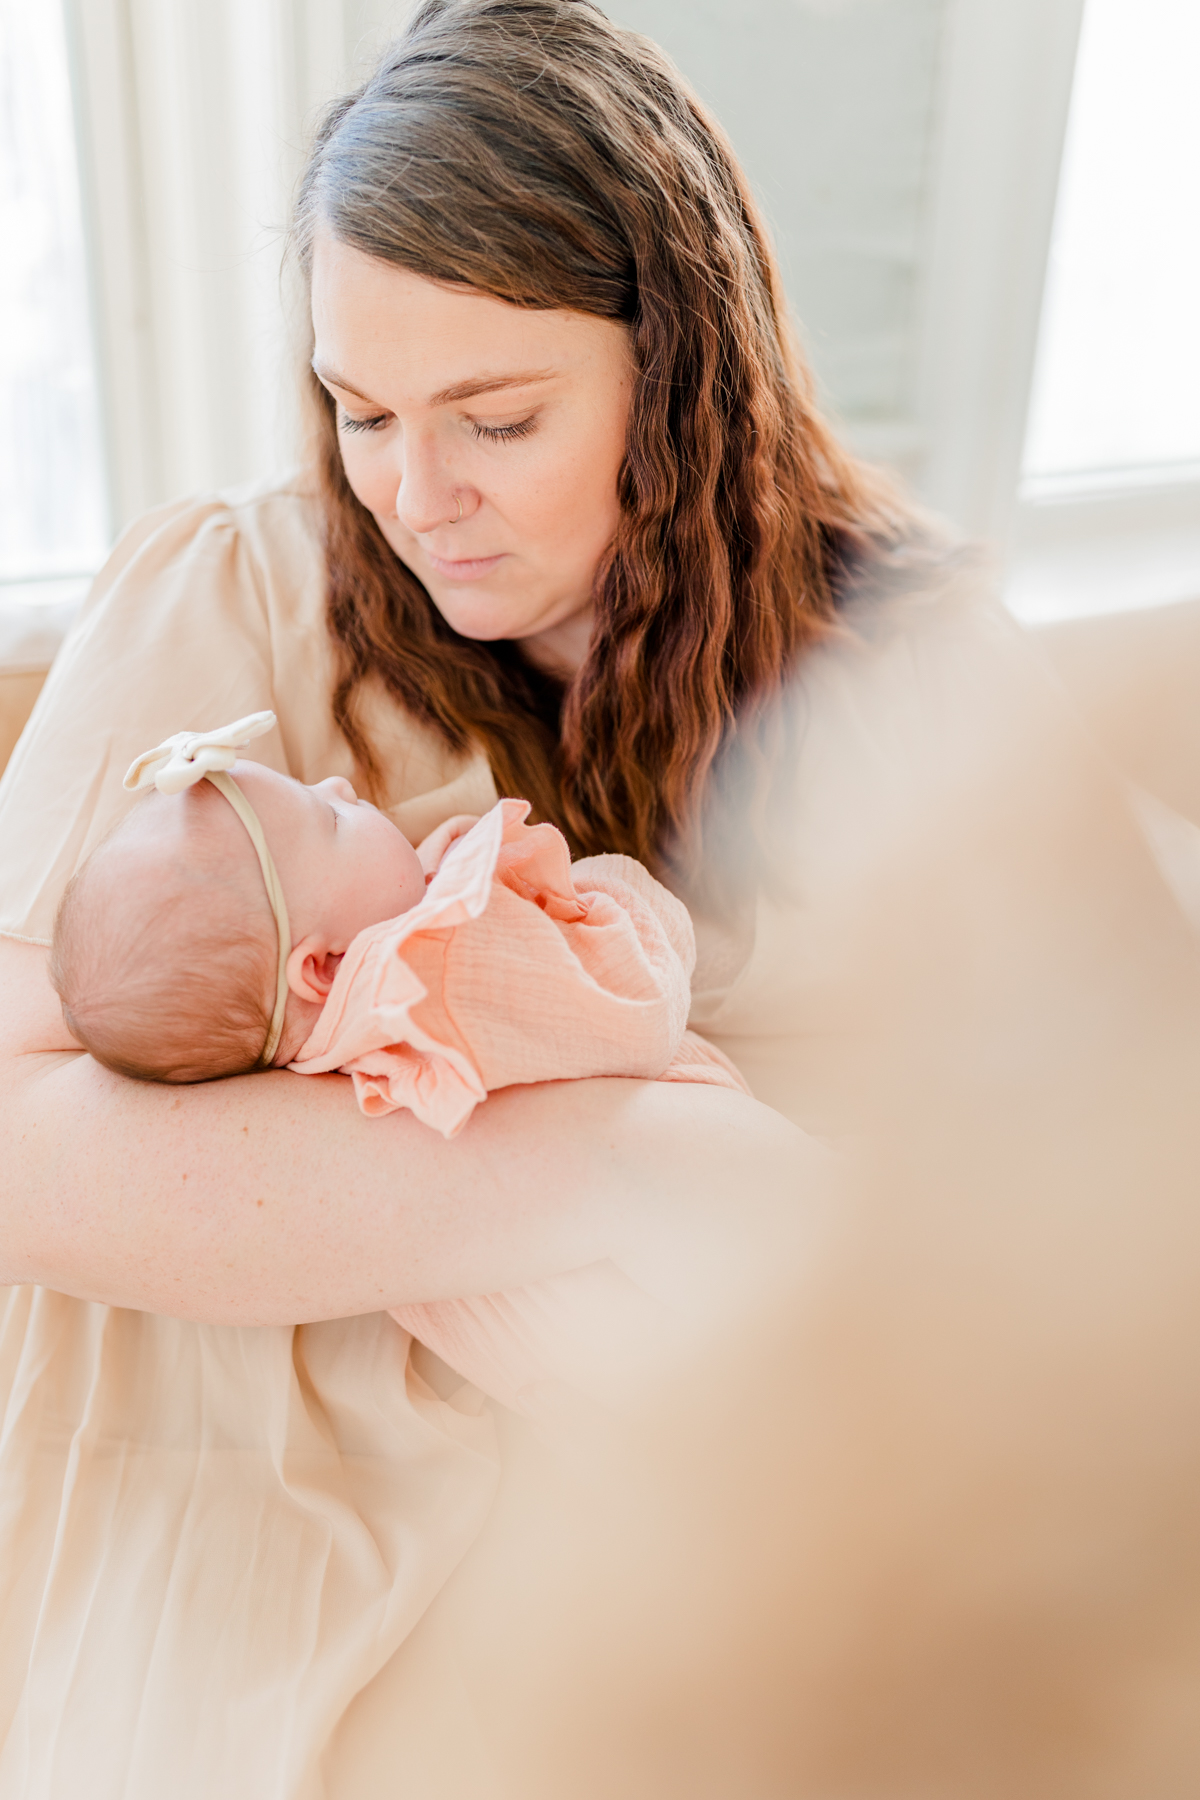 North Shore Newborn Photography - Mother gazing down at newborn in her arms